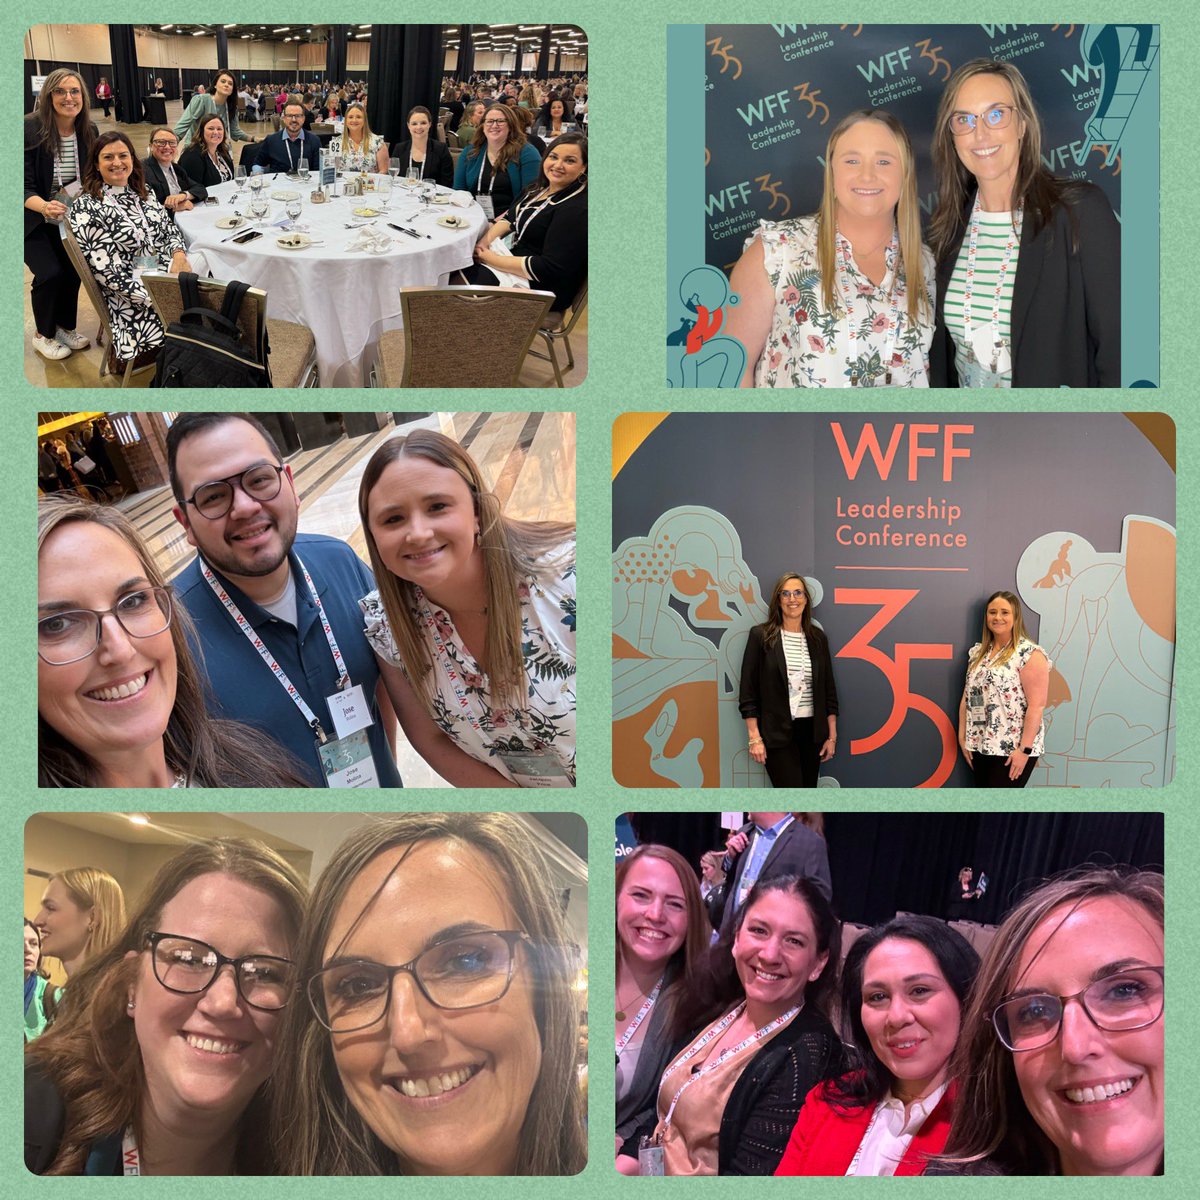 #WFFLimitless Day 2 is flying by and we are blown away by the new friendships, connections, and key note speakers provided by this amazing event! 🌶’s showing us all the love and pouring into our leadership bucket!